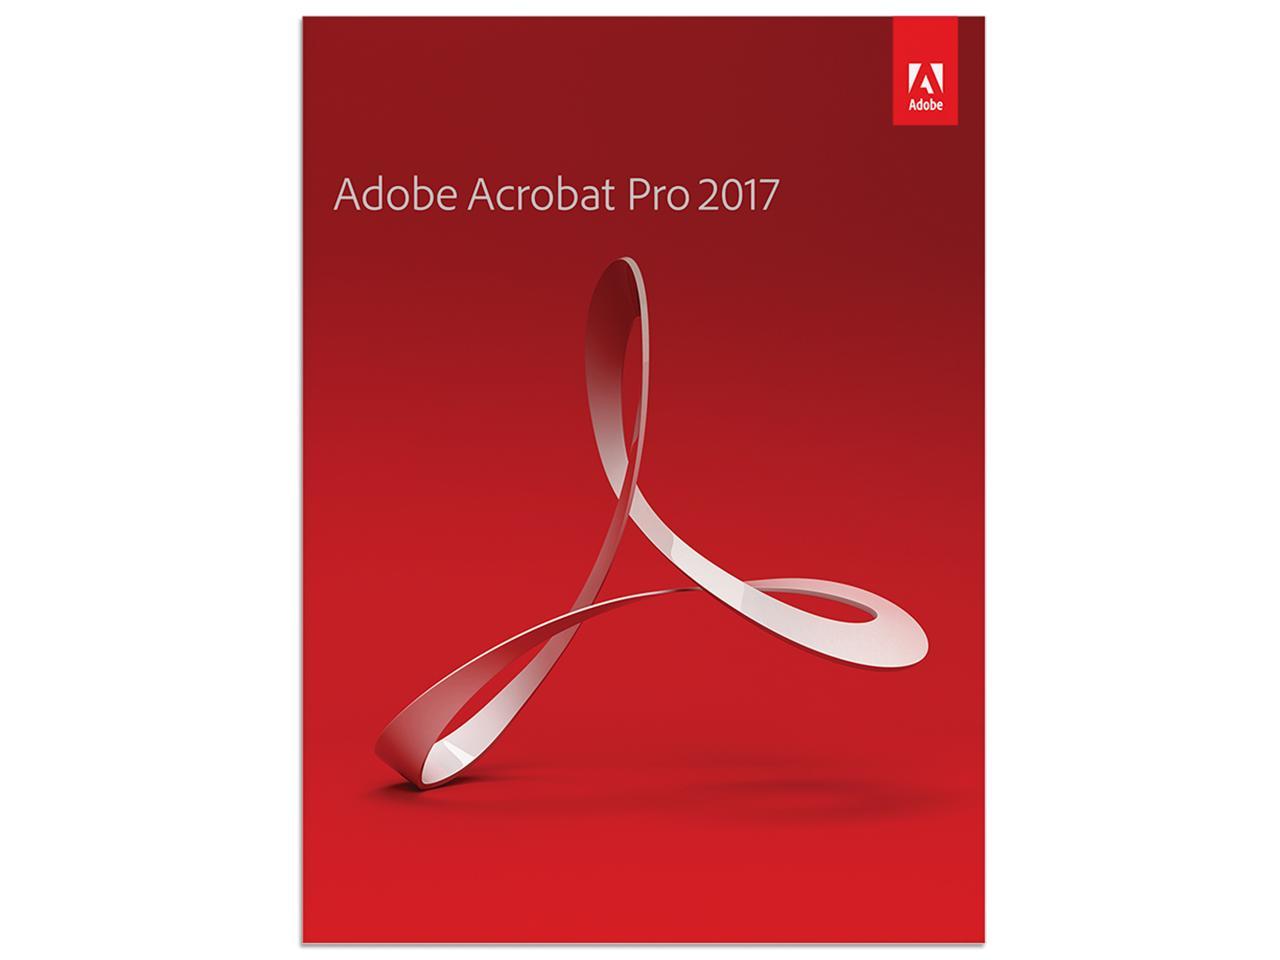 Acrobat x pro upgrade download after effects slideshow template download